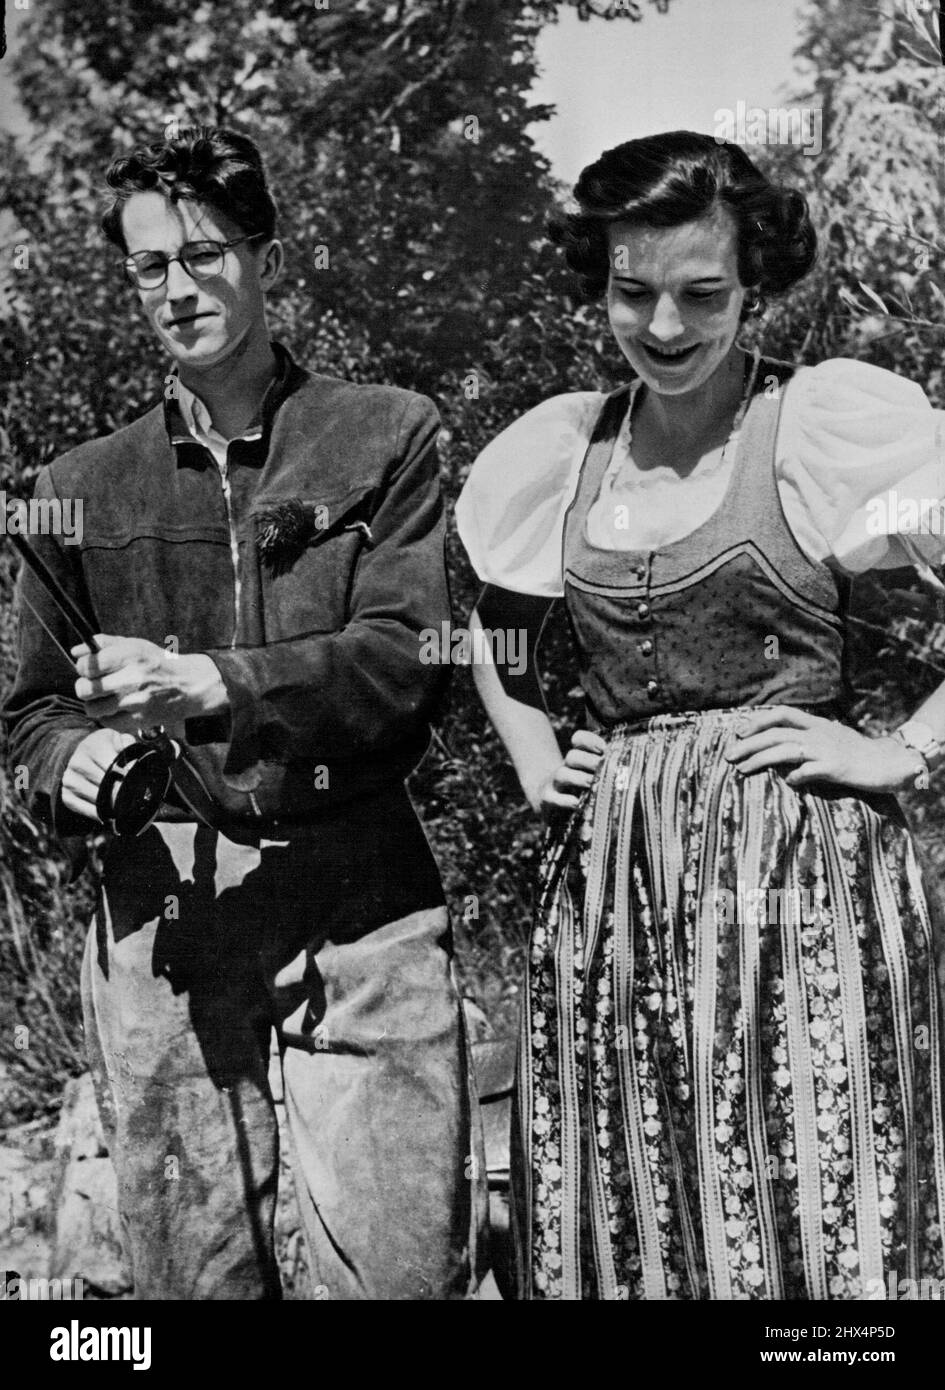 King Baudouin And His Stepmother -- Photographed during their Austrian summer holiday in 1952, King Baudouin of the Belgians with his stepmother, Princess De Rethy. May 4, 1953. (Photo by Camera Press). Stock Photo